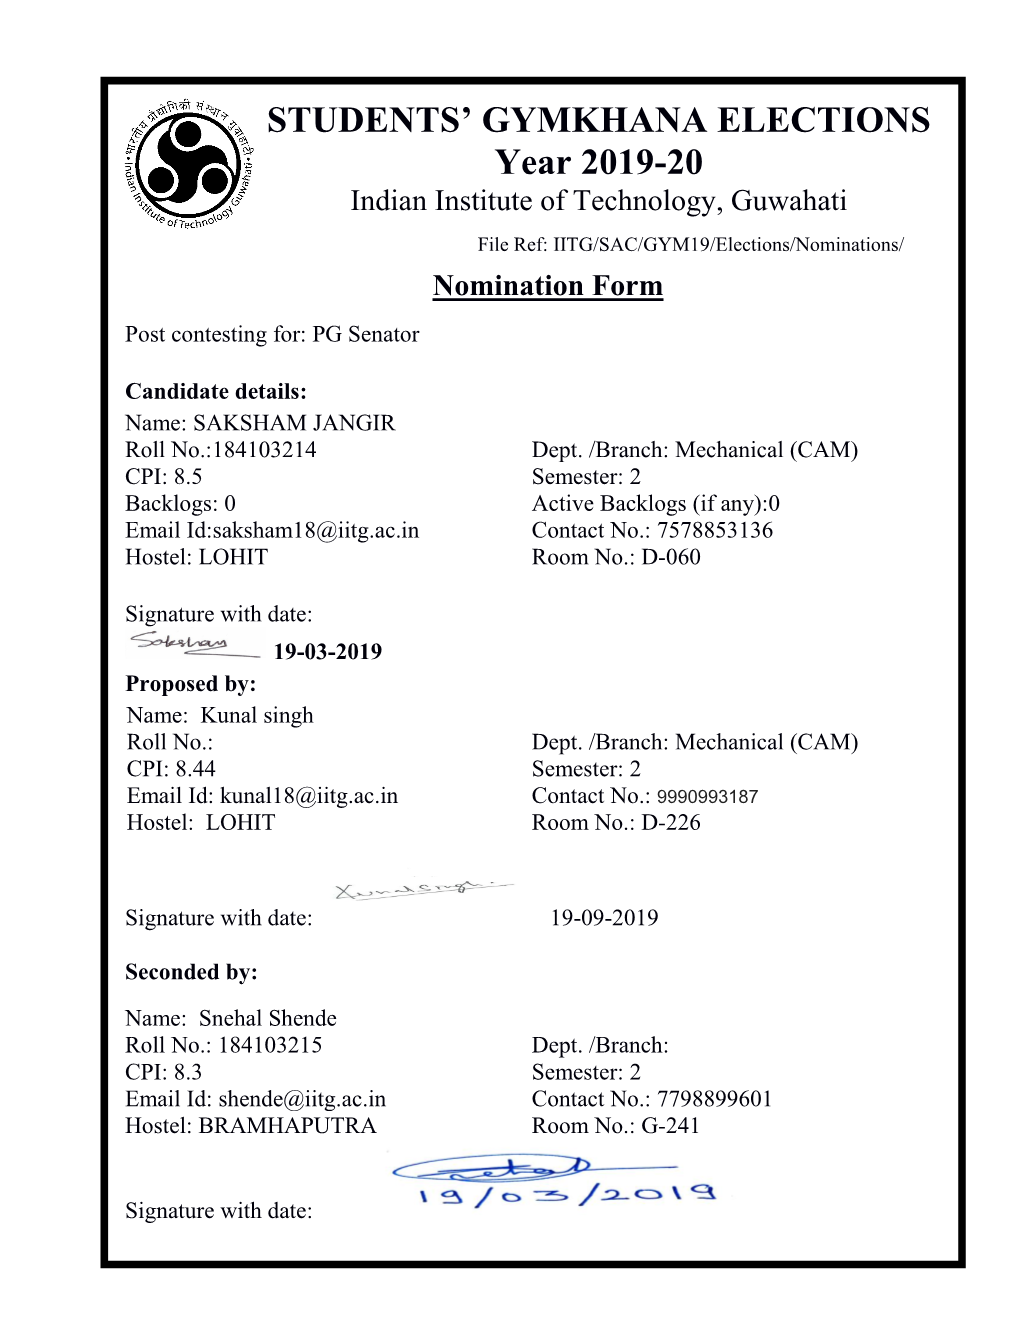 STUDENTS' GYMKHANA ELECTIONS Year 2019-20